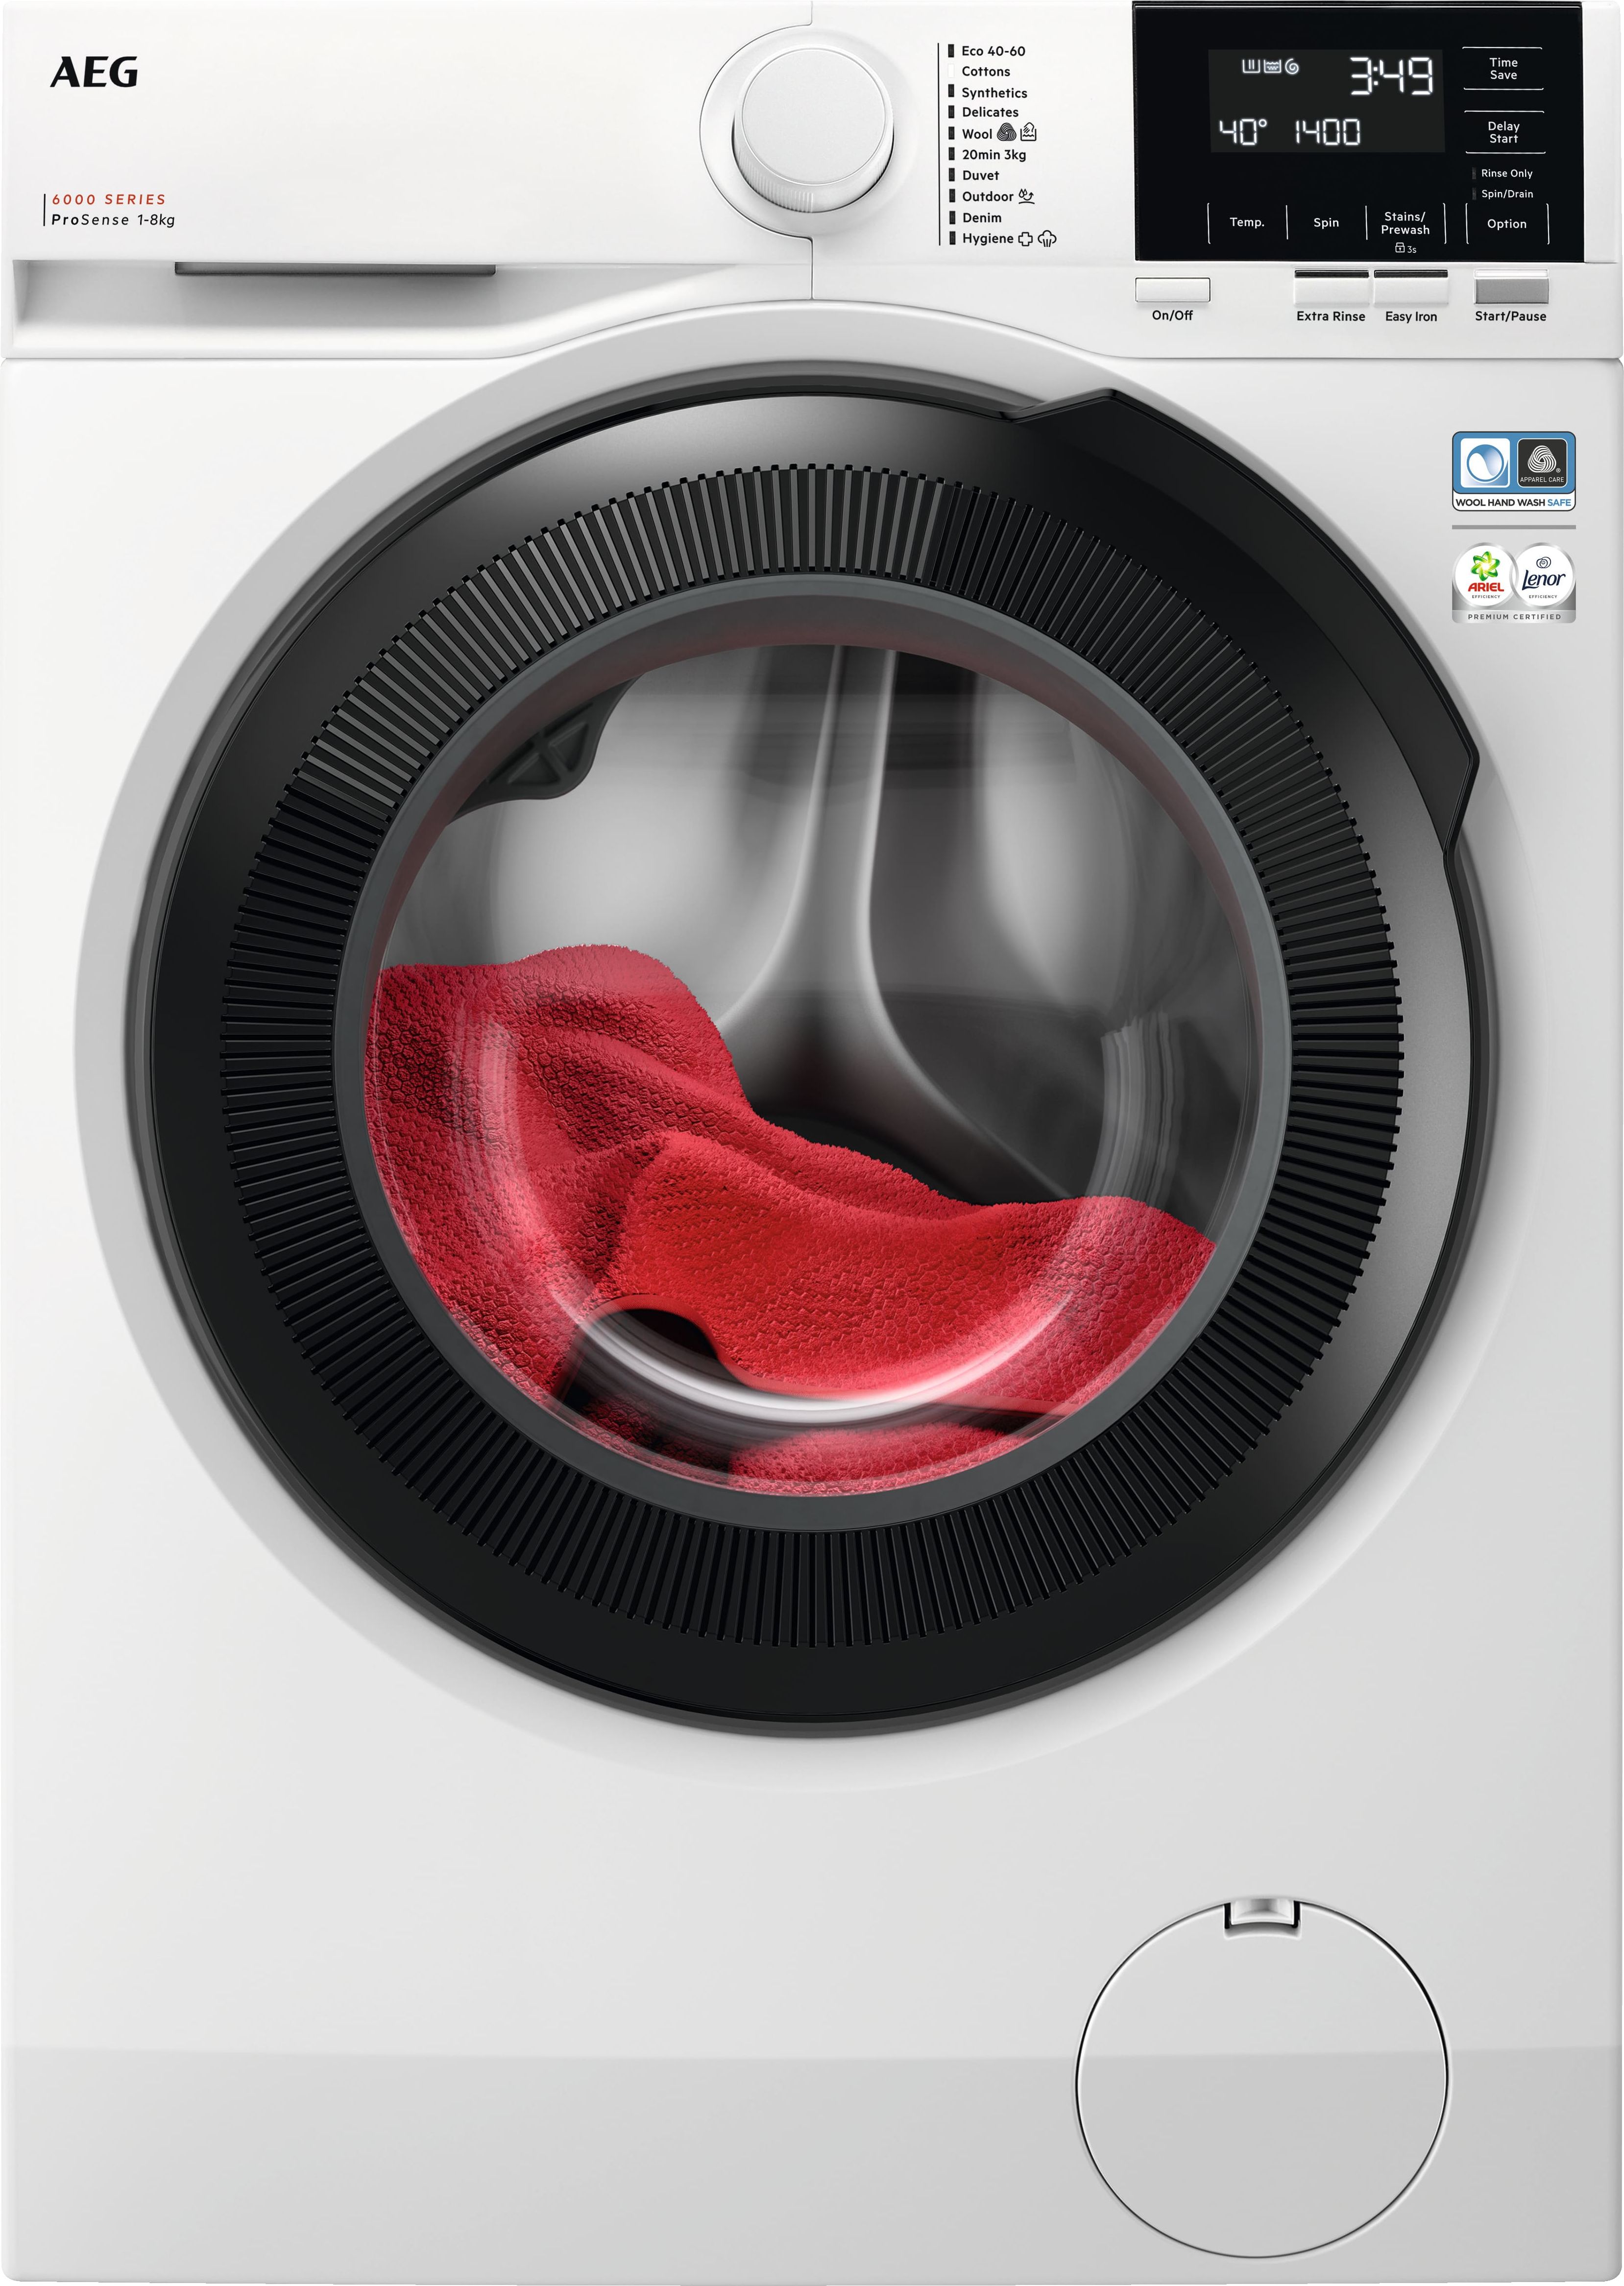 with White - Machine Series 4 8kg Rated rpm - C 1400 WAN28282GB Washing Bosch